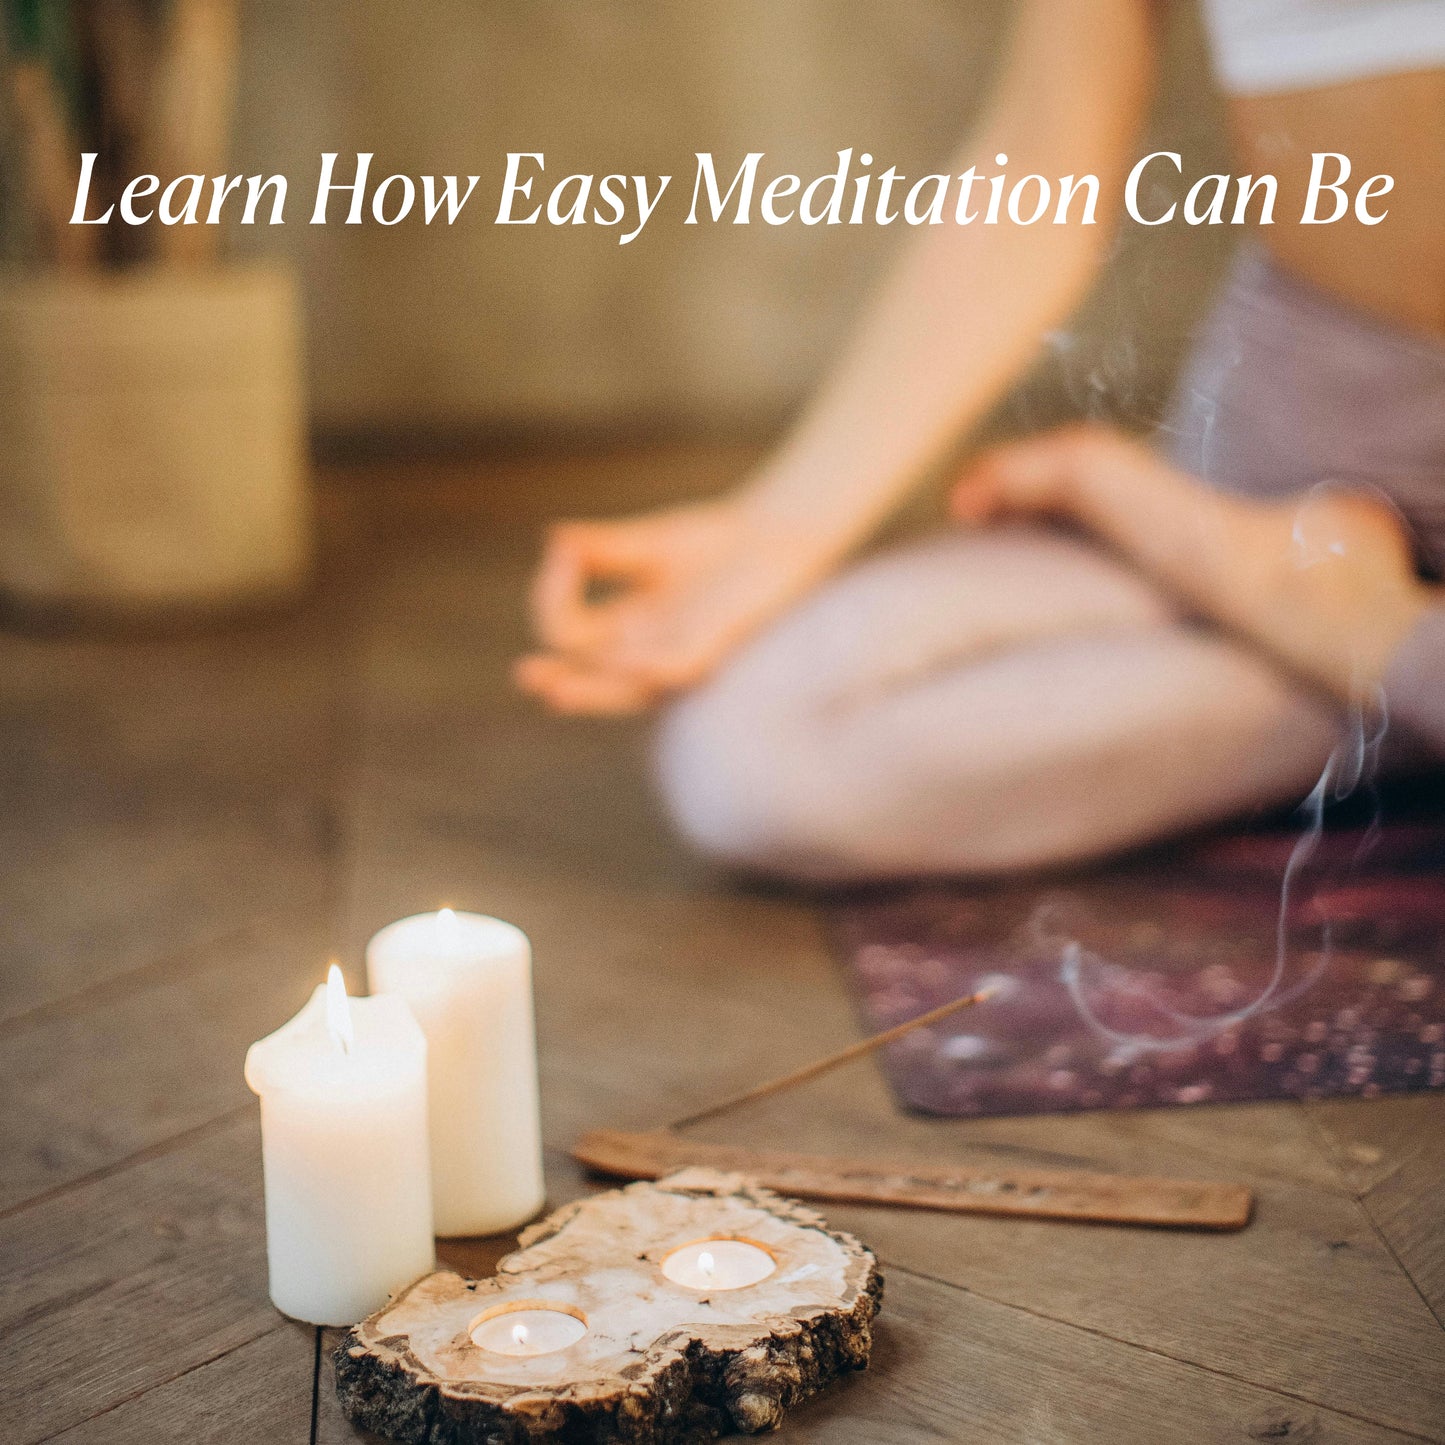 Learn how to meditate. Learn how easy meditation is